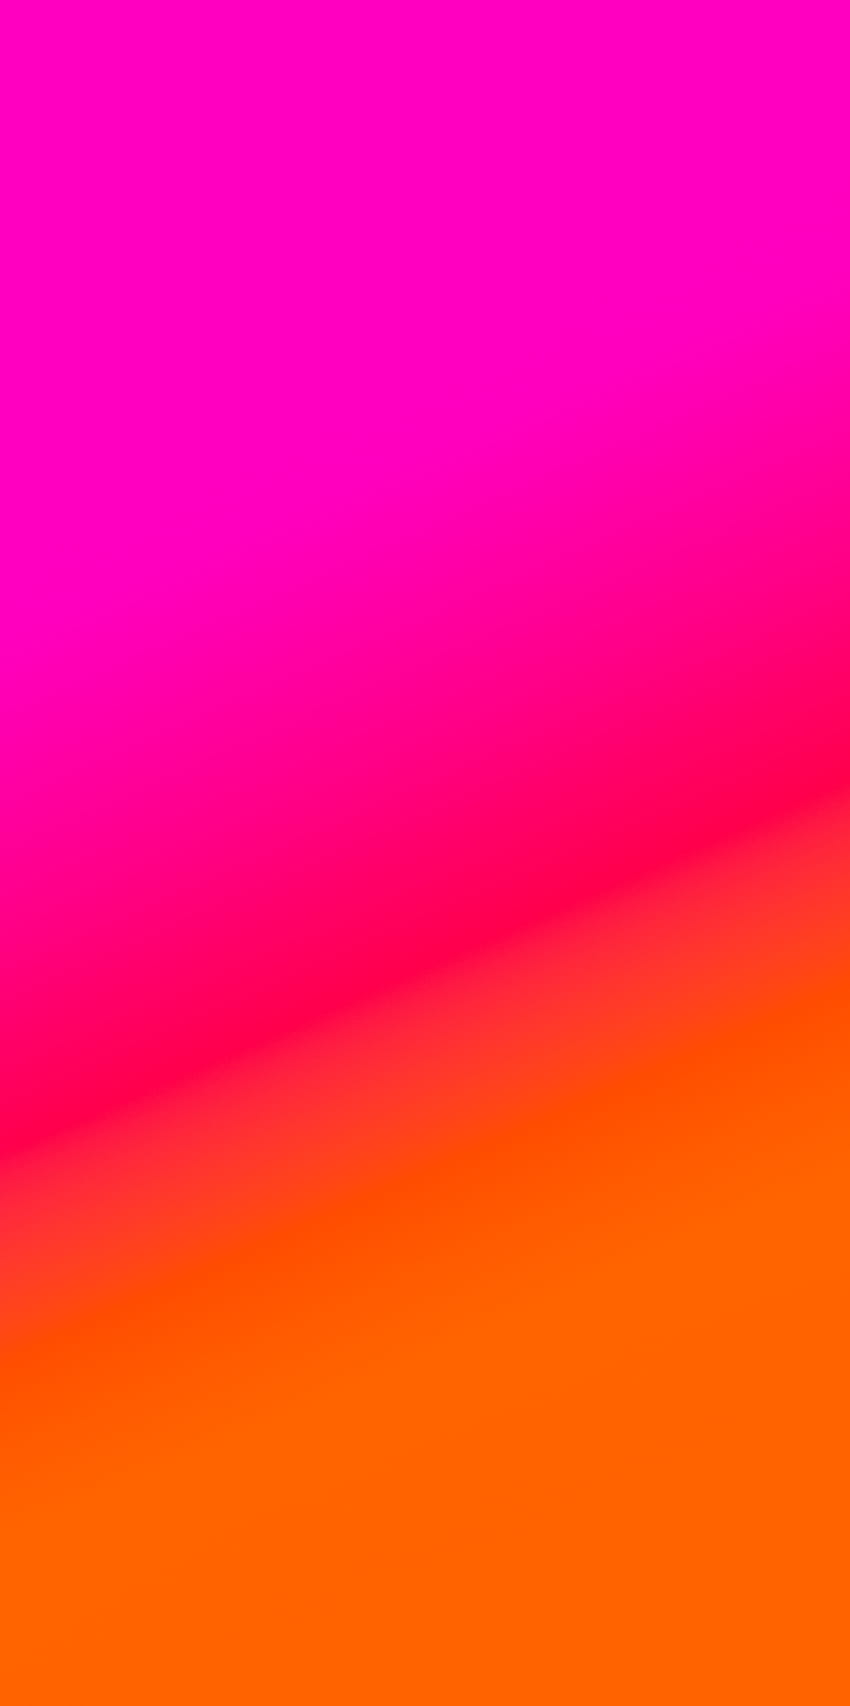 Bright gradient for iPhone, red yellow orange pink HD phone wallpaper